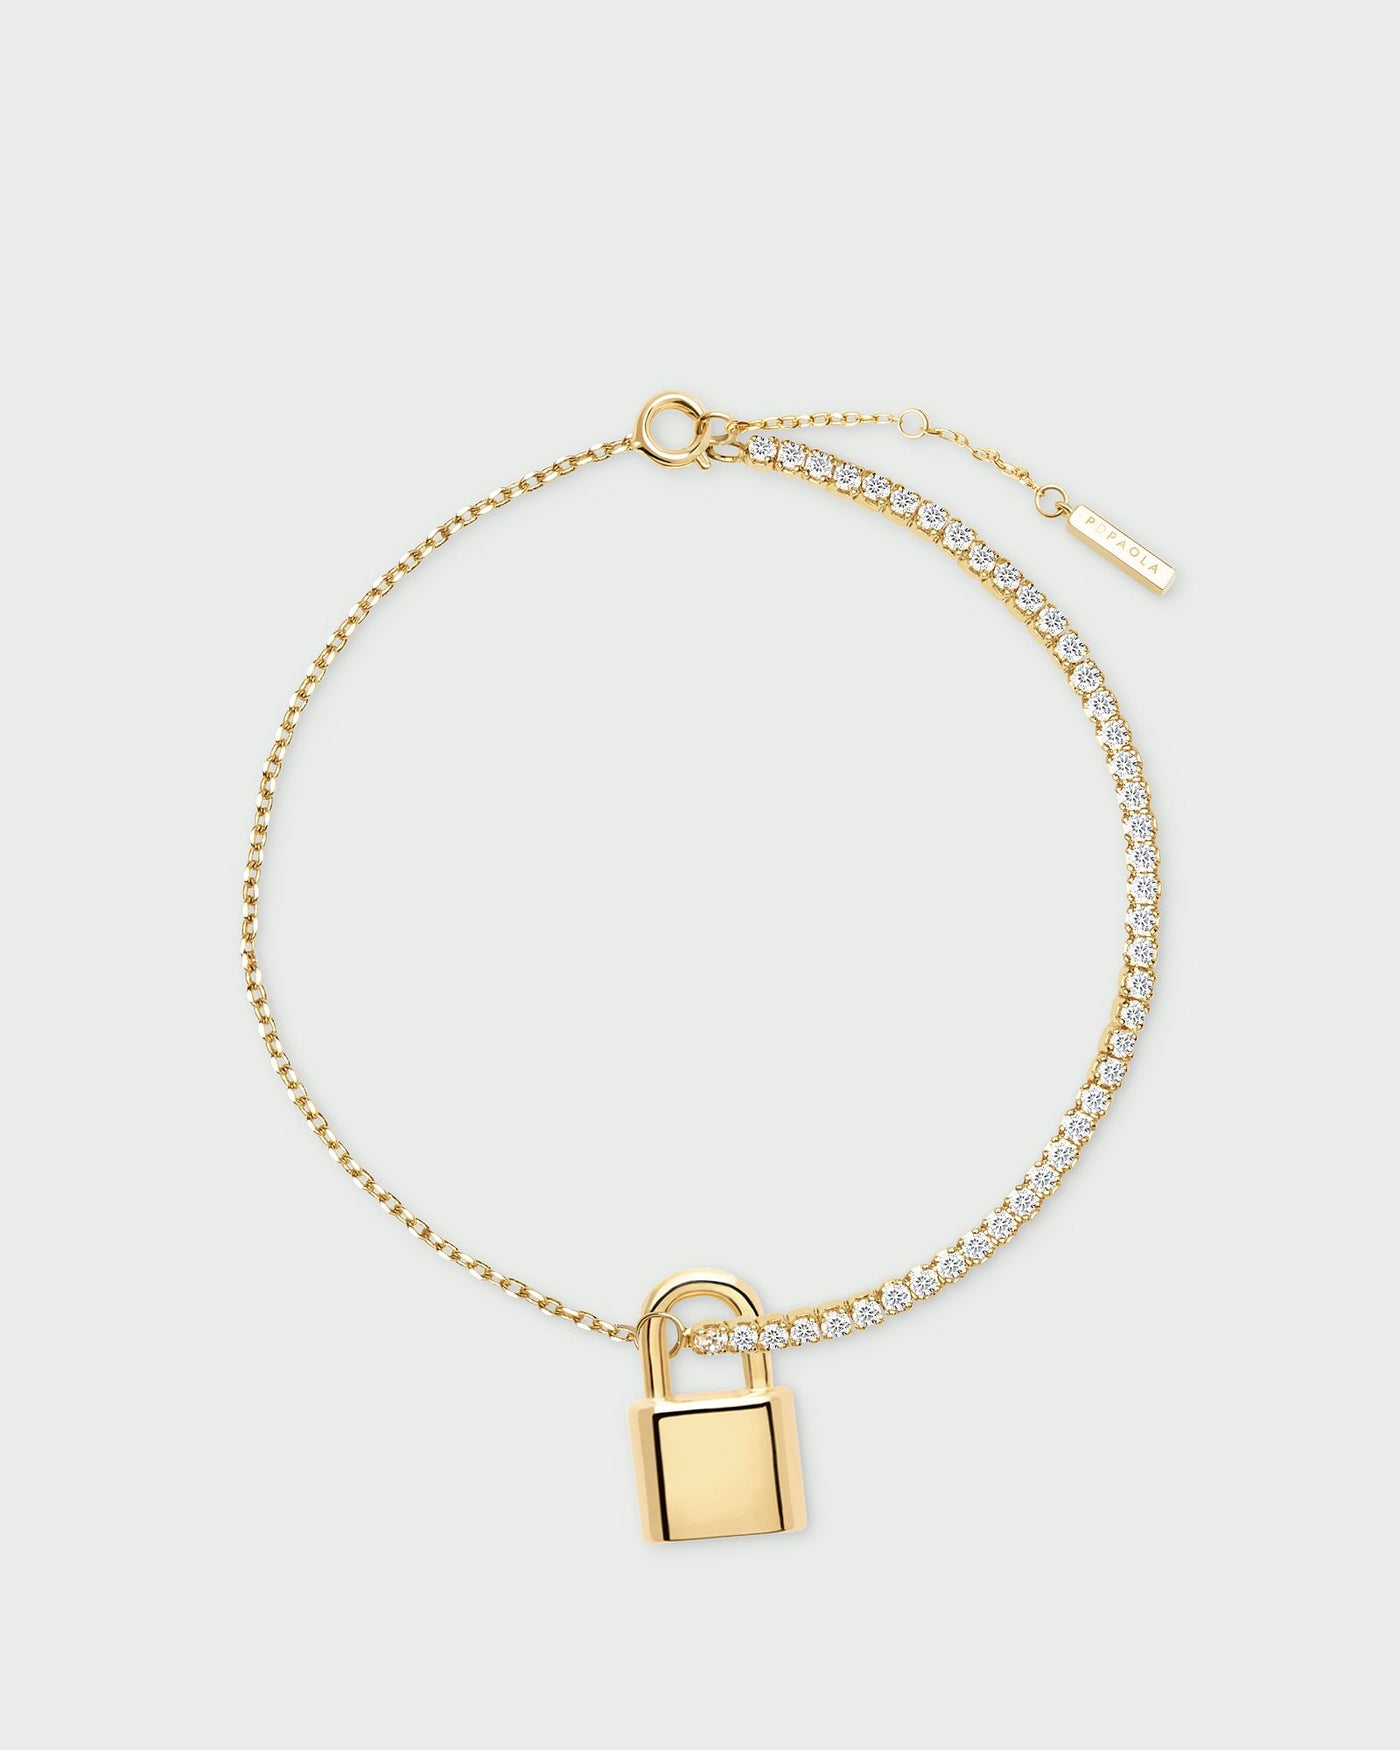 2024 Selection | Bond Bracelet. Gold-plated silver bracelet with white zirconia and personalized padlock pendant. Get the latest arrival from PDPAOLA. Place your order safely and get this Best Seller. Free Shipping.